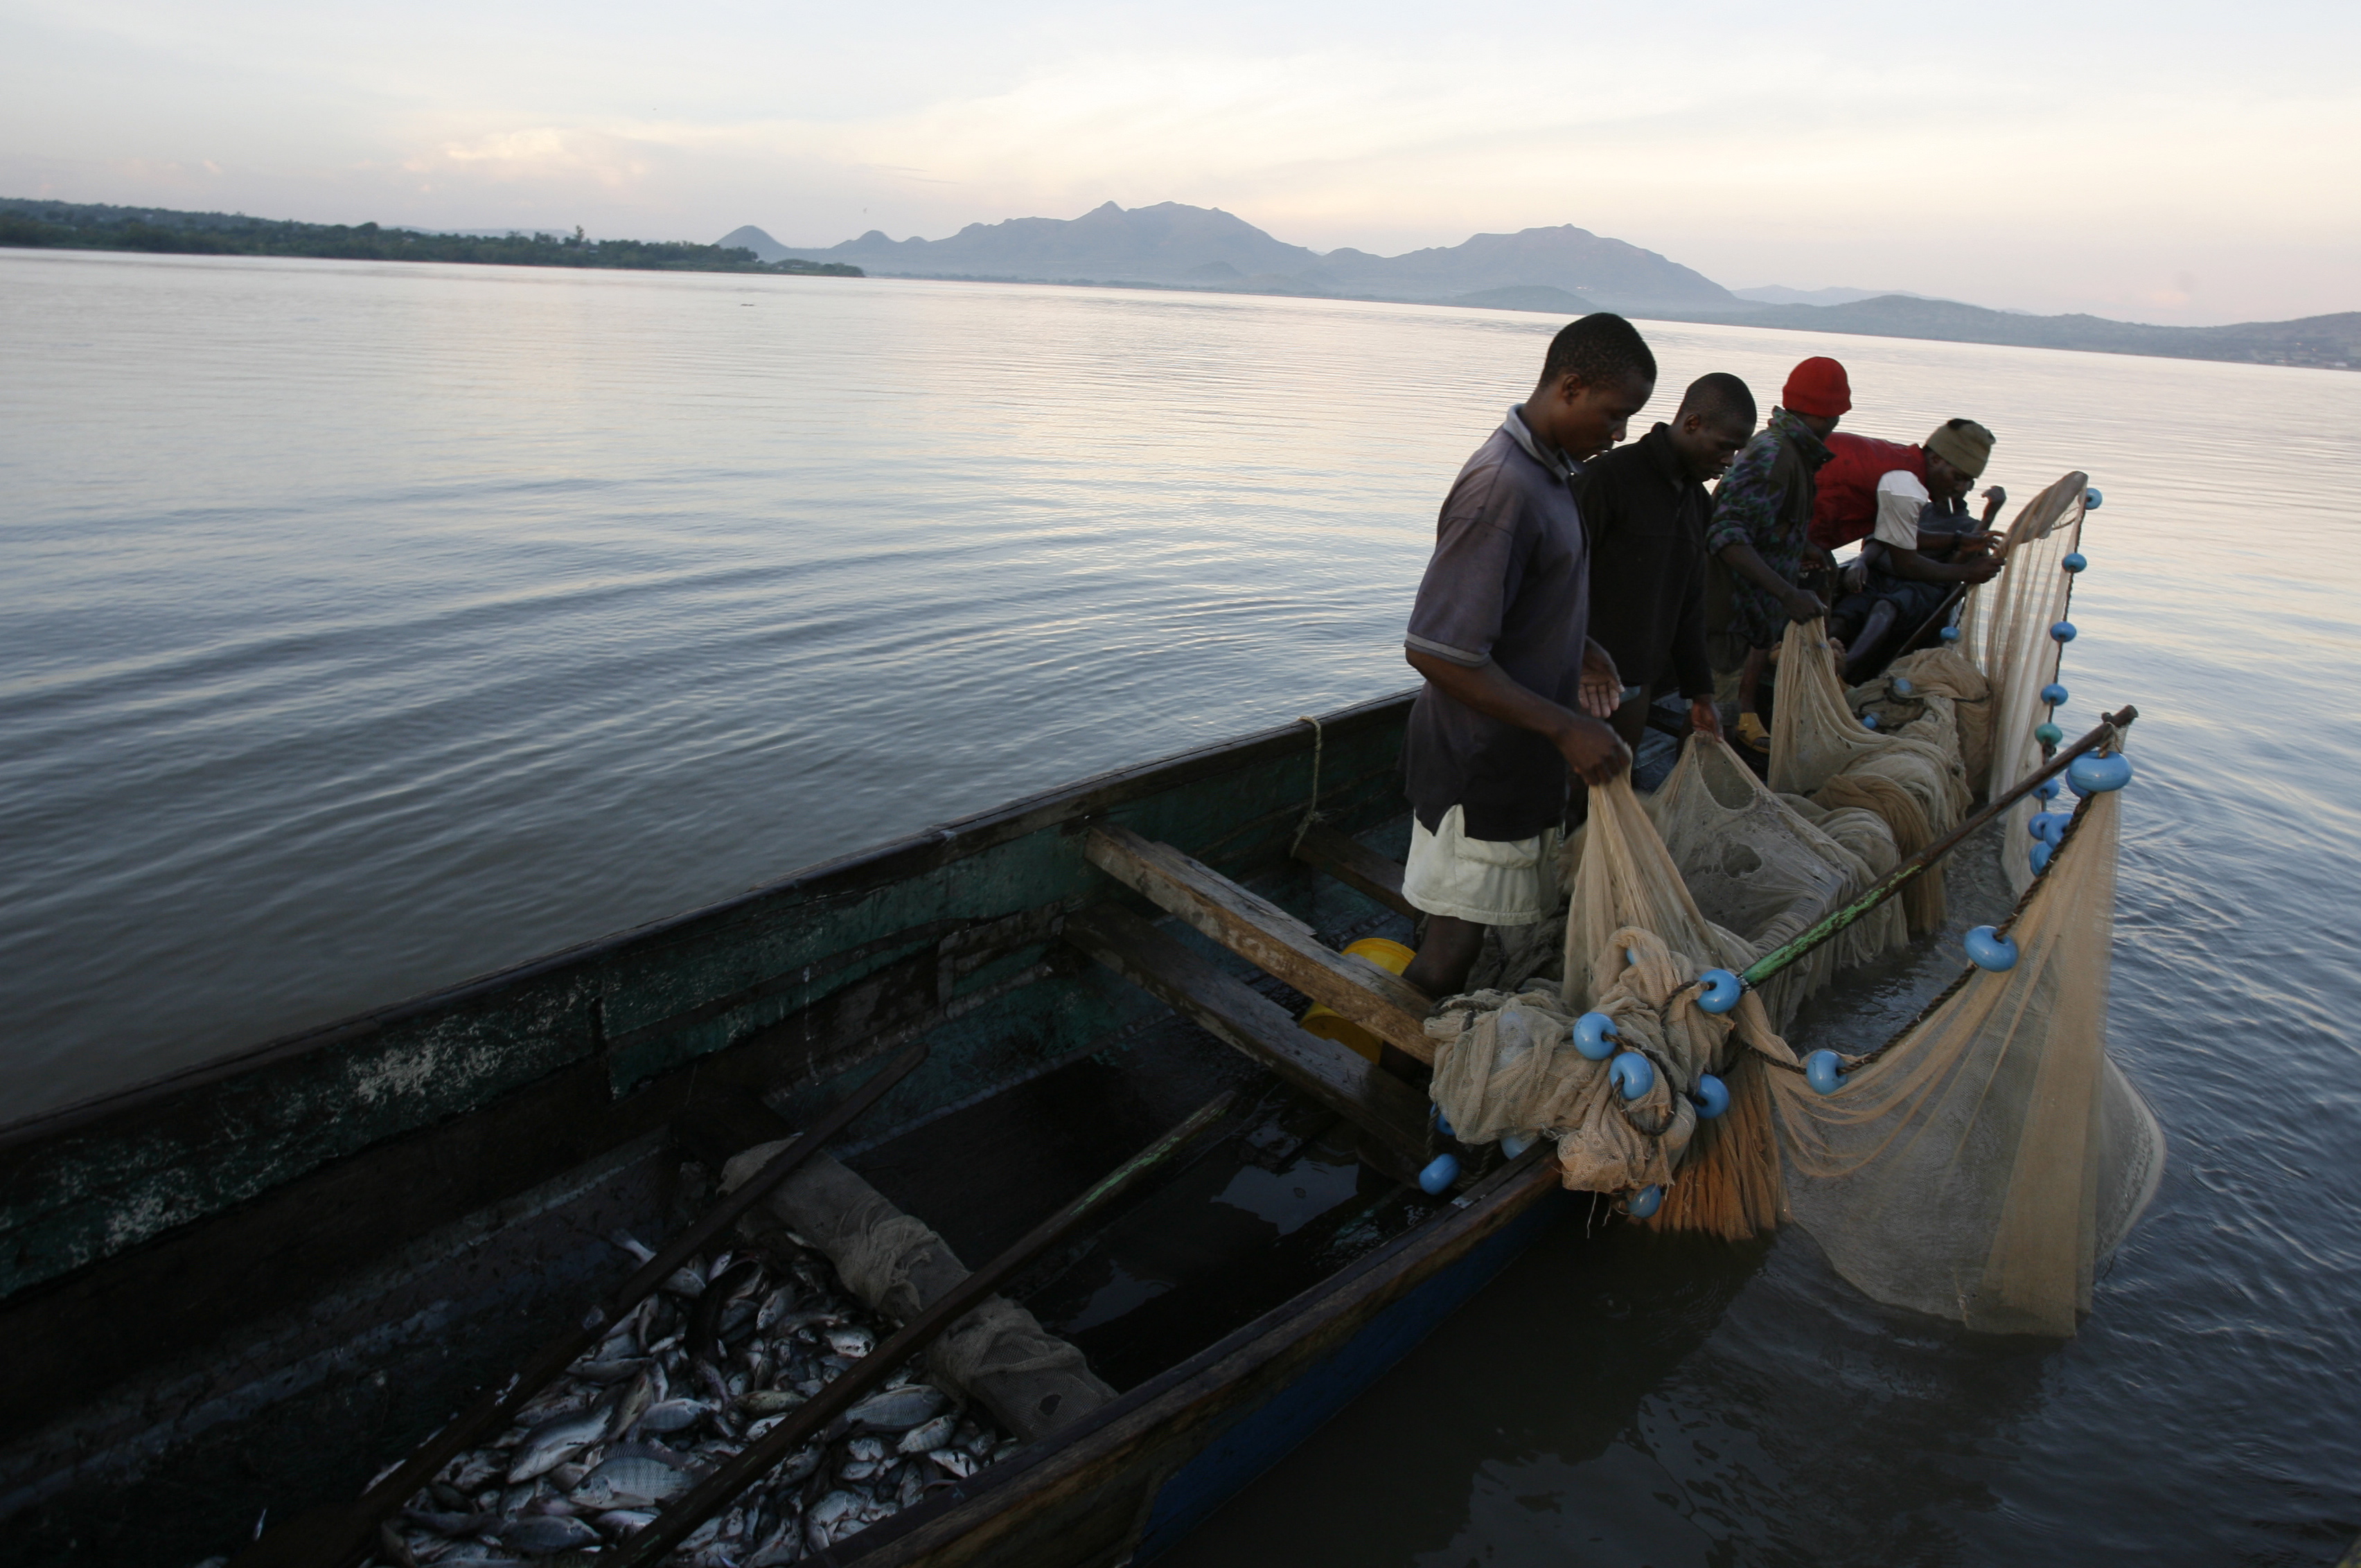 A family of fishermen check their nets in the early morning hours on Lake Victoria near Homa Bay, in western Kenya, 28 November 2009.